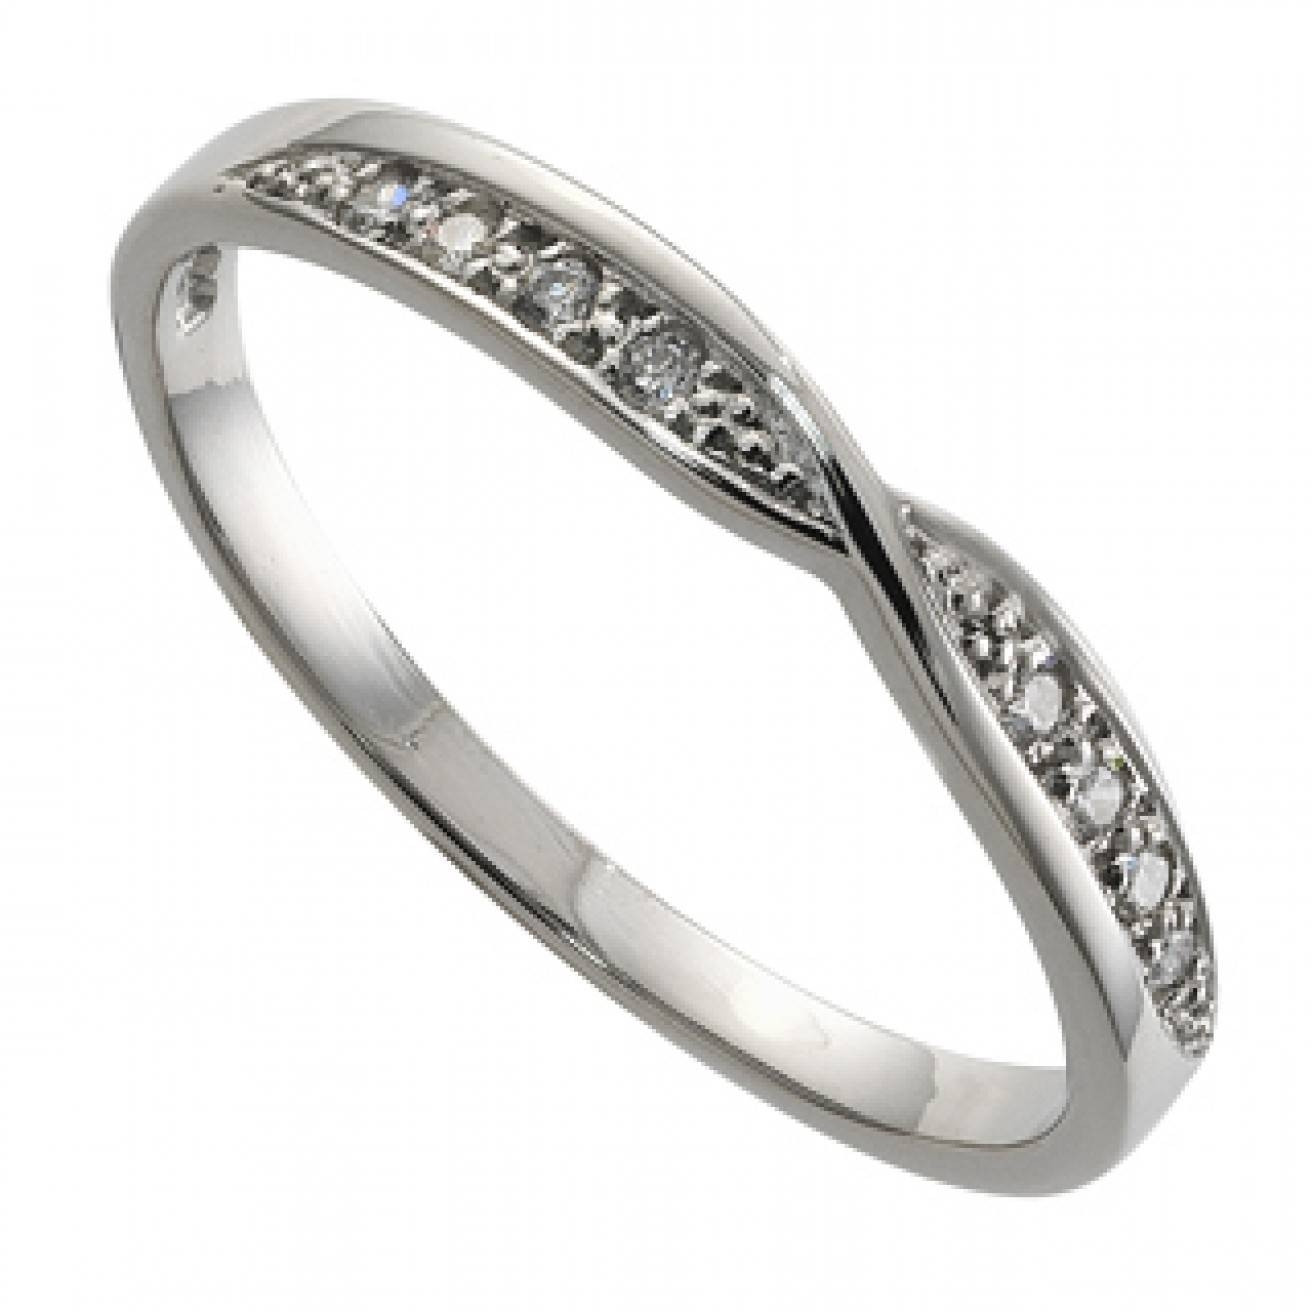 Platinum Wedding Bands For Women
 15 Collection of Platinum Wedding Rings For Women